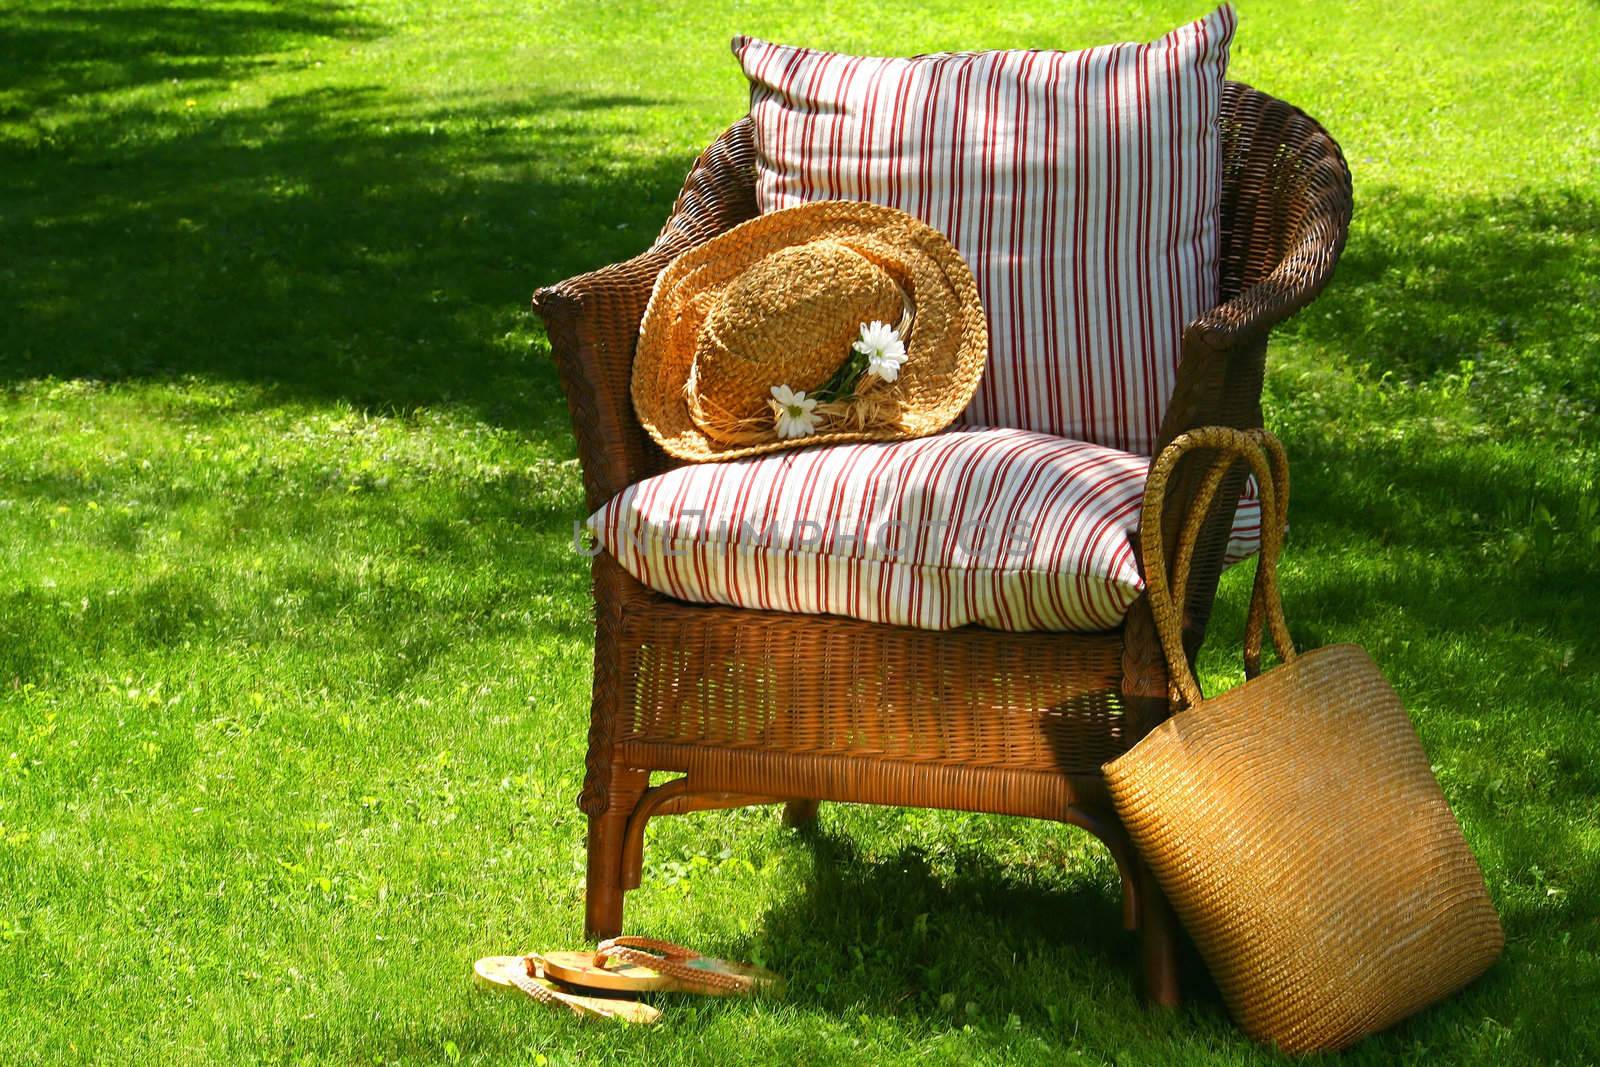 Straw hat, old wicker chair waiting for someone to relax on a hot summer's day